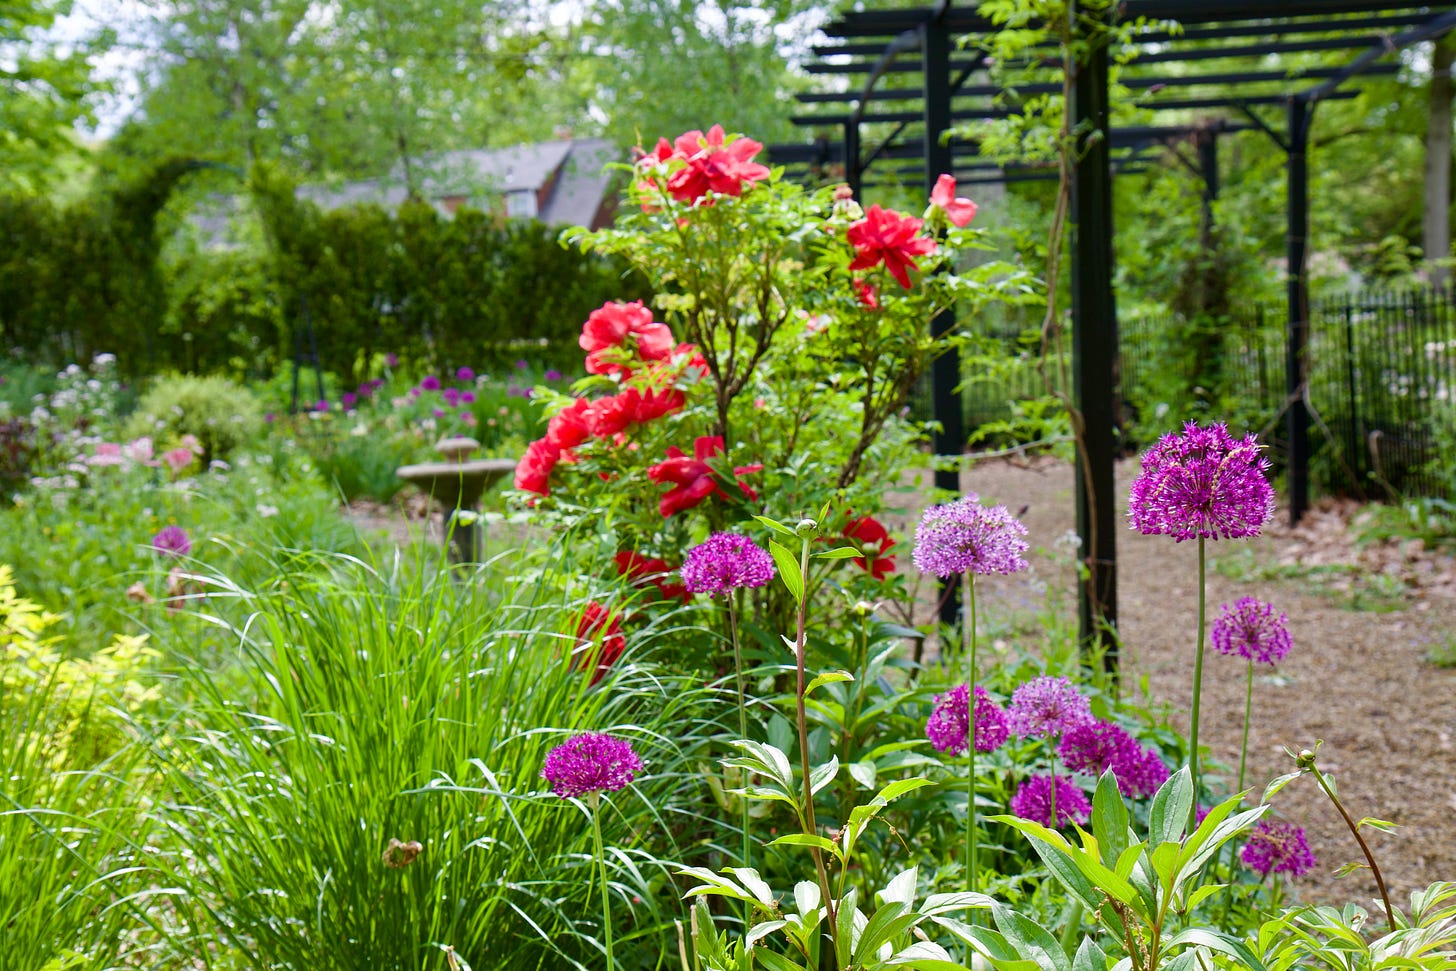 Allium ‘Purple Sensation’, Tree peony (Paeonia suffruticosa), golden Spirea and Feather Reed grass (Calamagrostis ‘Karl Foerster’ just rising for the May garden tour in the Cottage Garden.